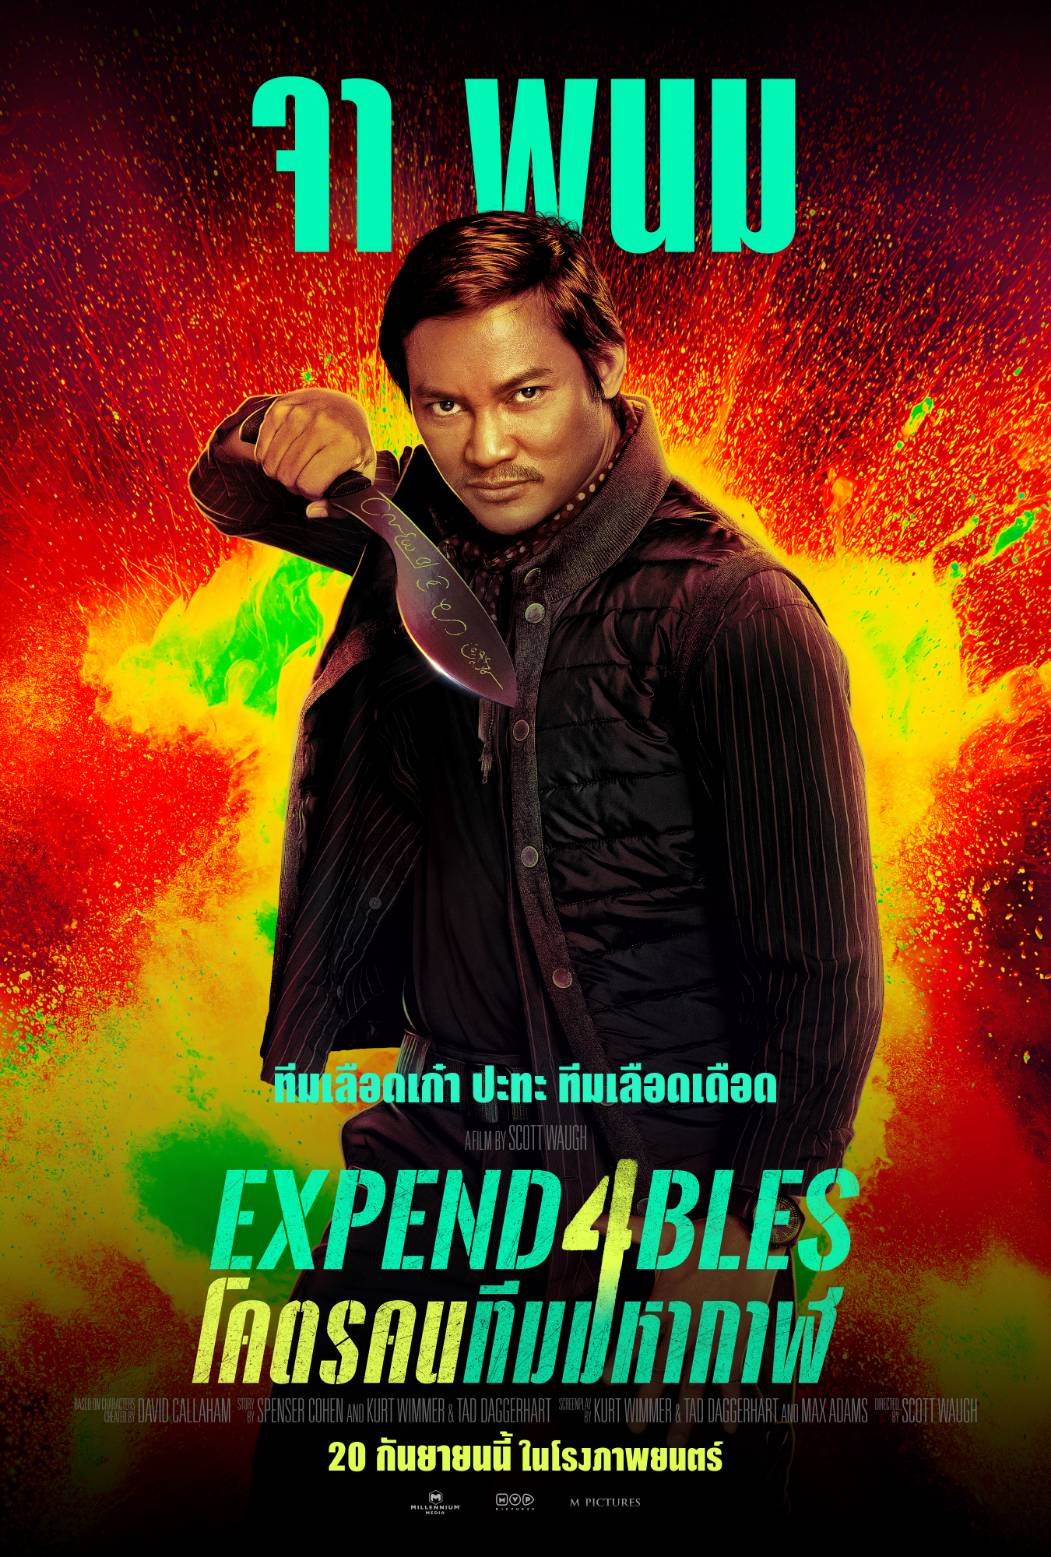  Expendables4